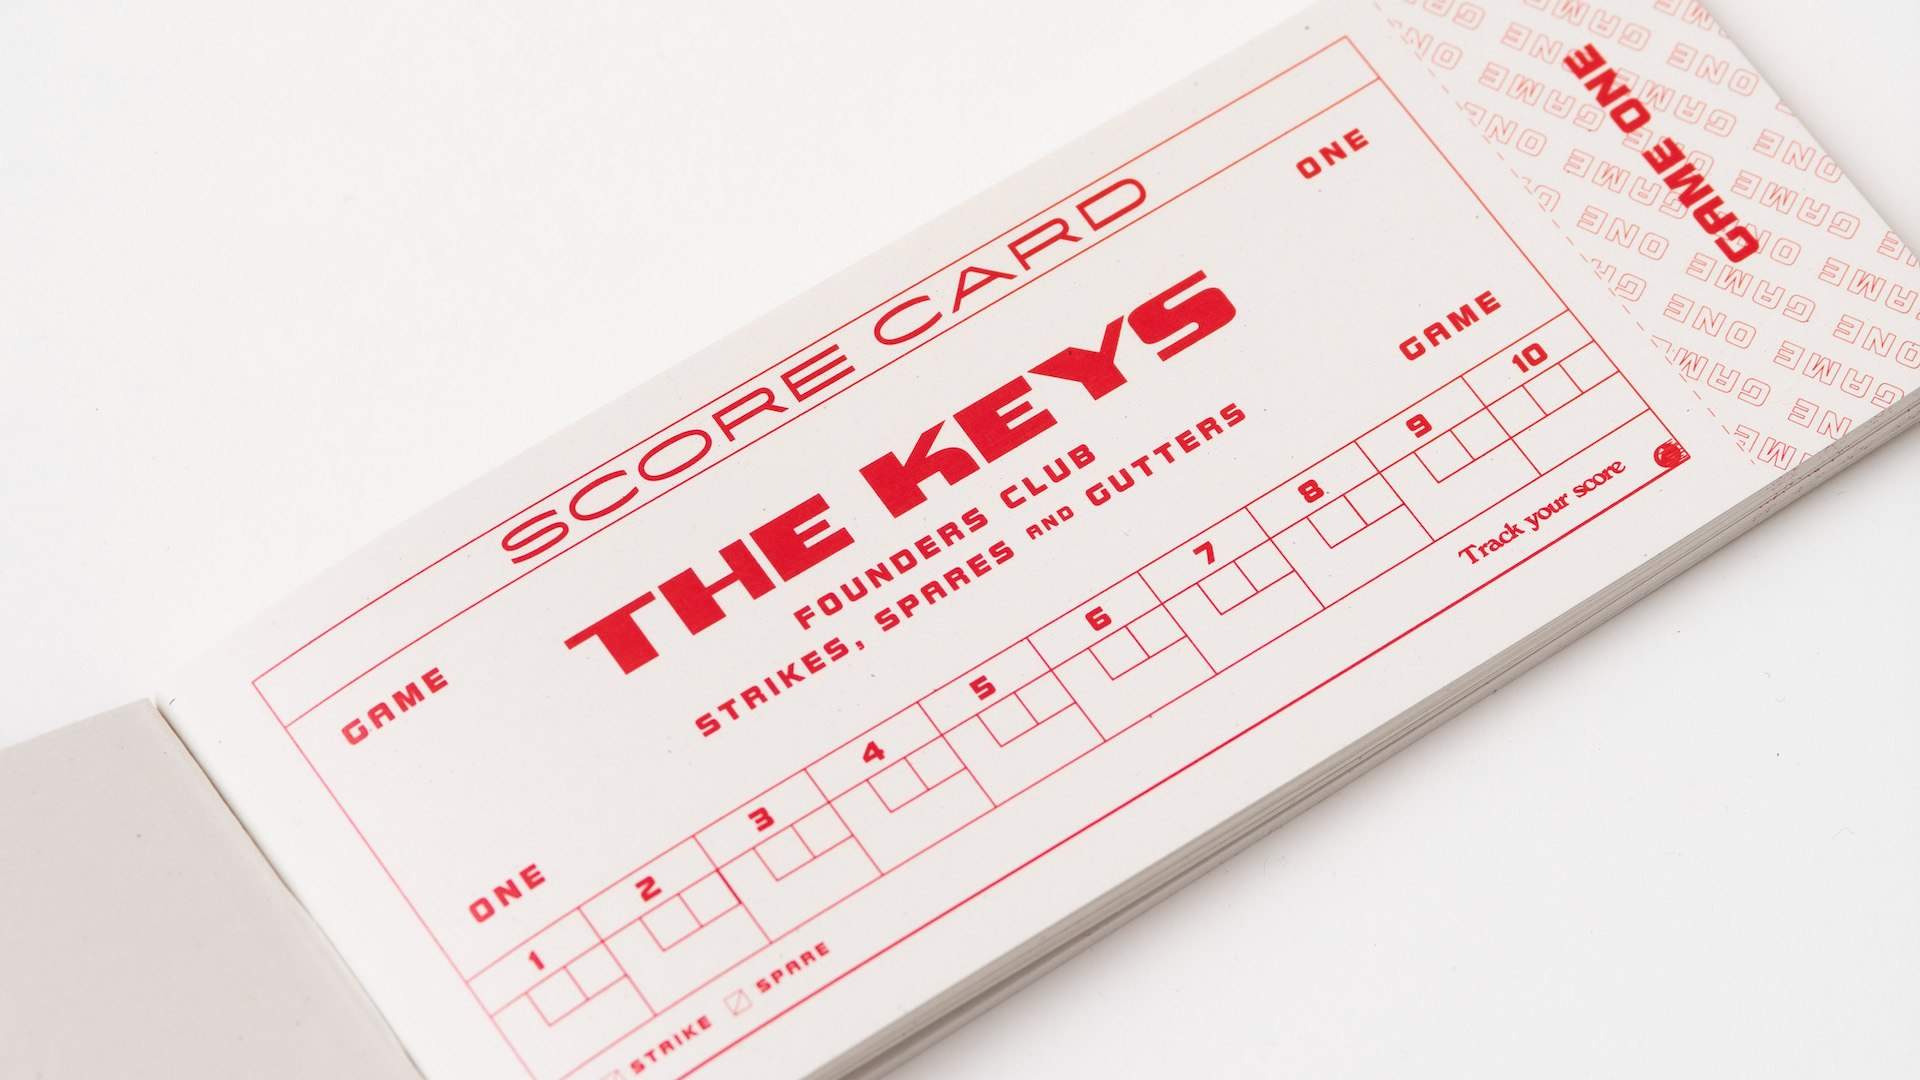 The Keys Is a New All-In-One Beer Garden, Arcade and Bowling Alley Opening This Summer